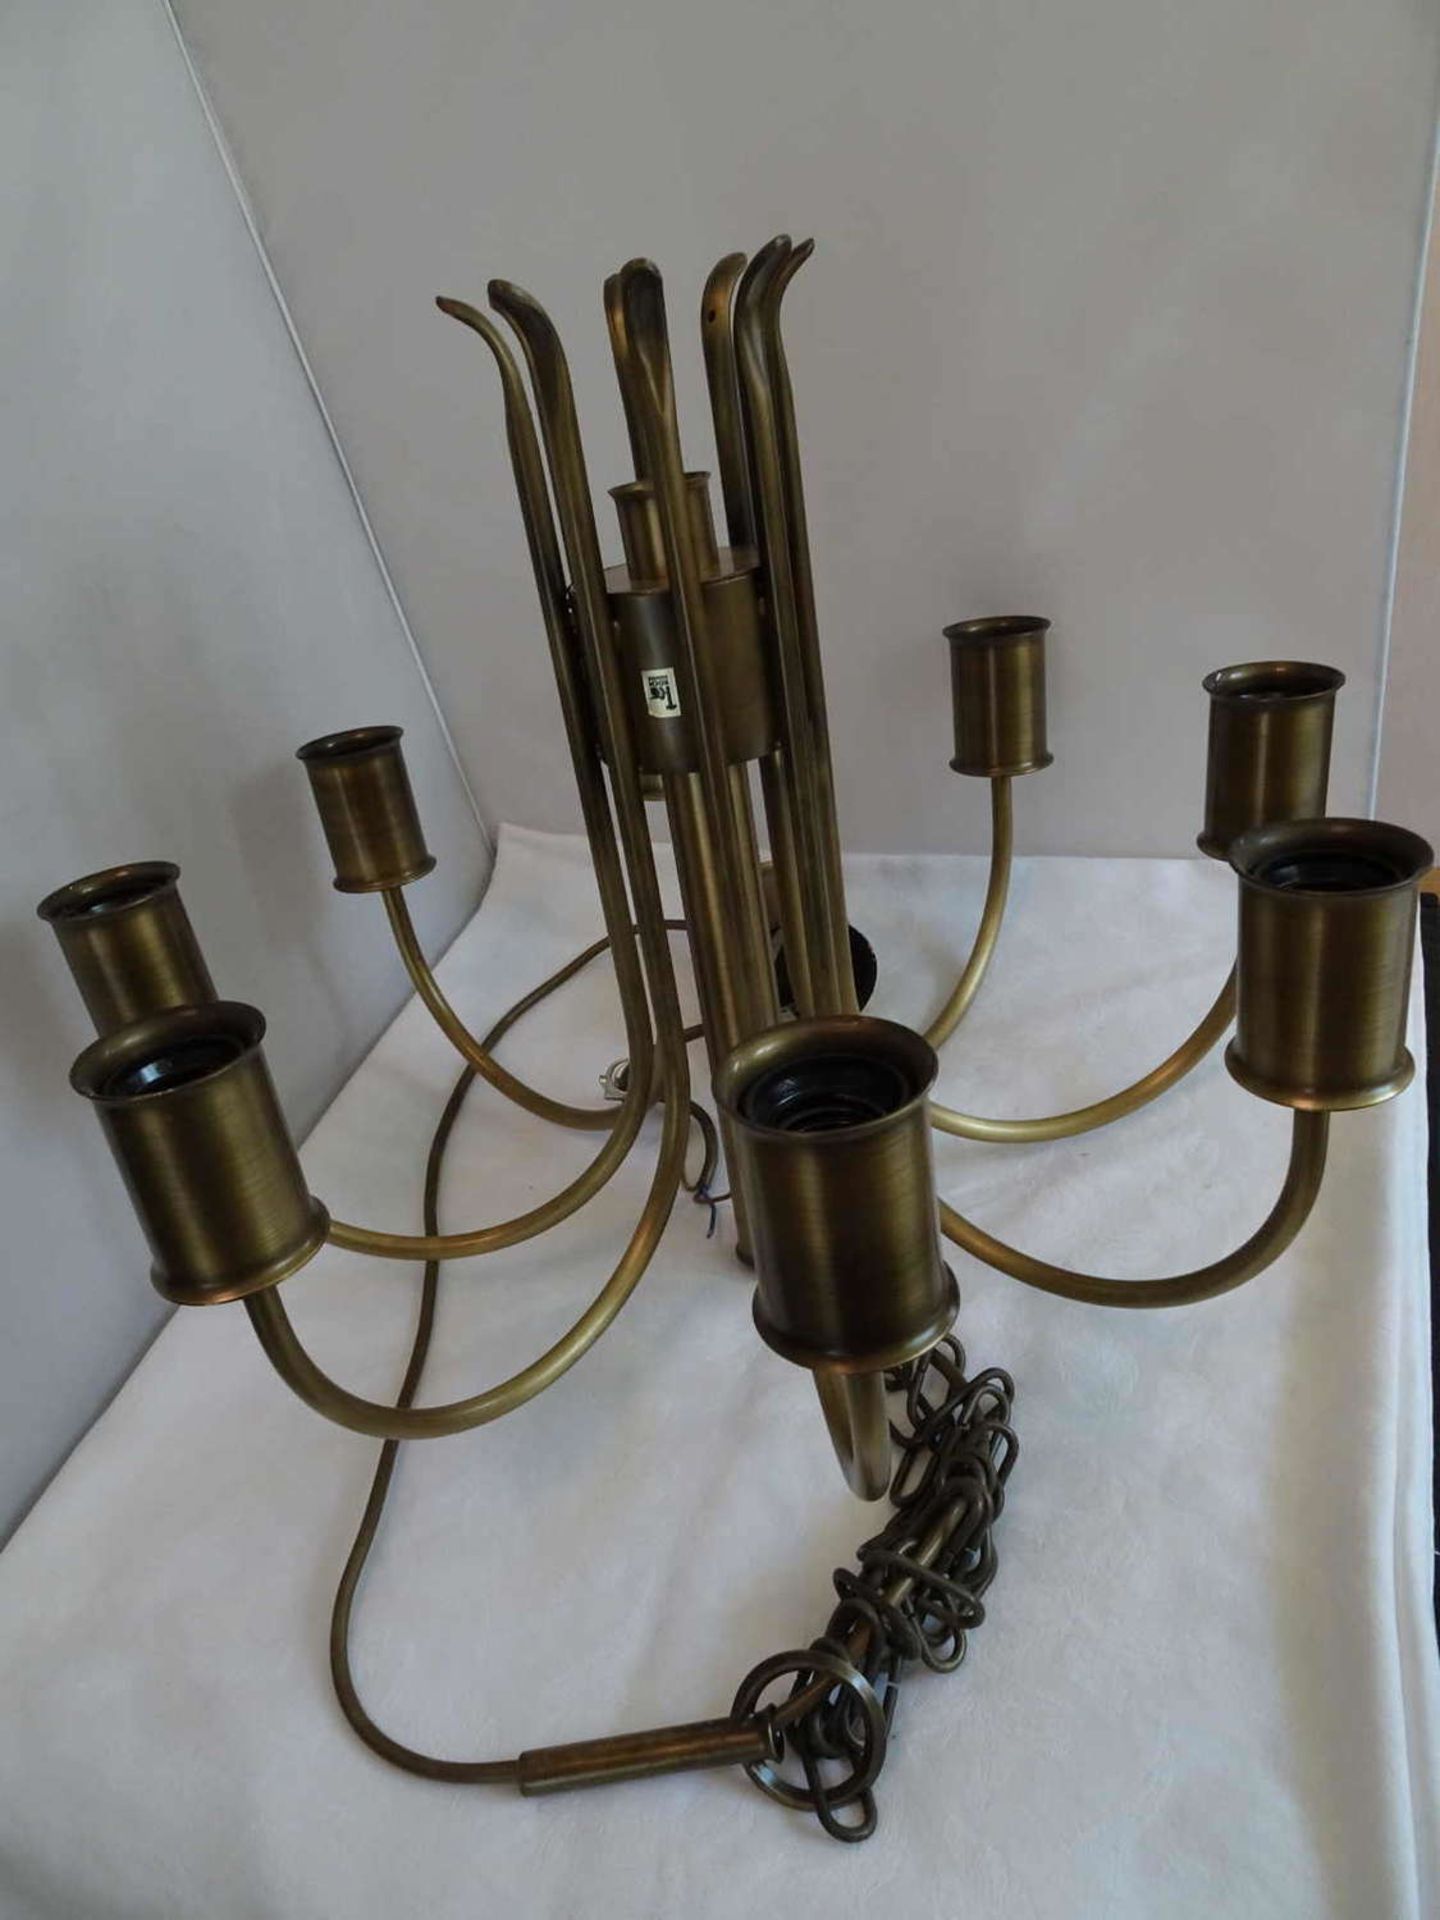 8-beam brass ceiling lamp, approx. 50s / 60s with large incandescent lamps. Please visit!